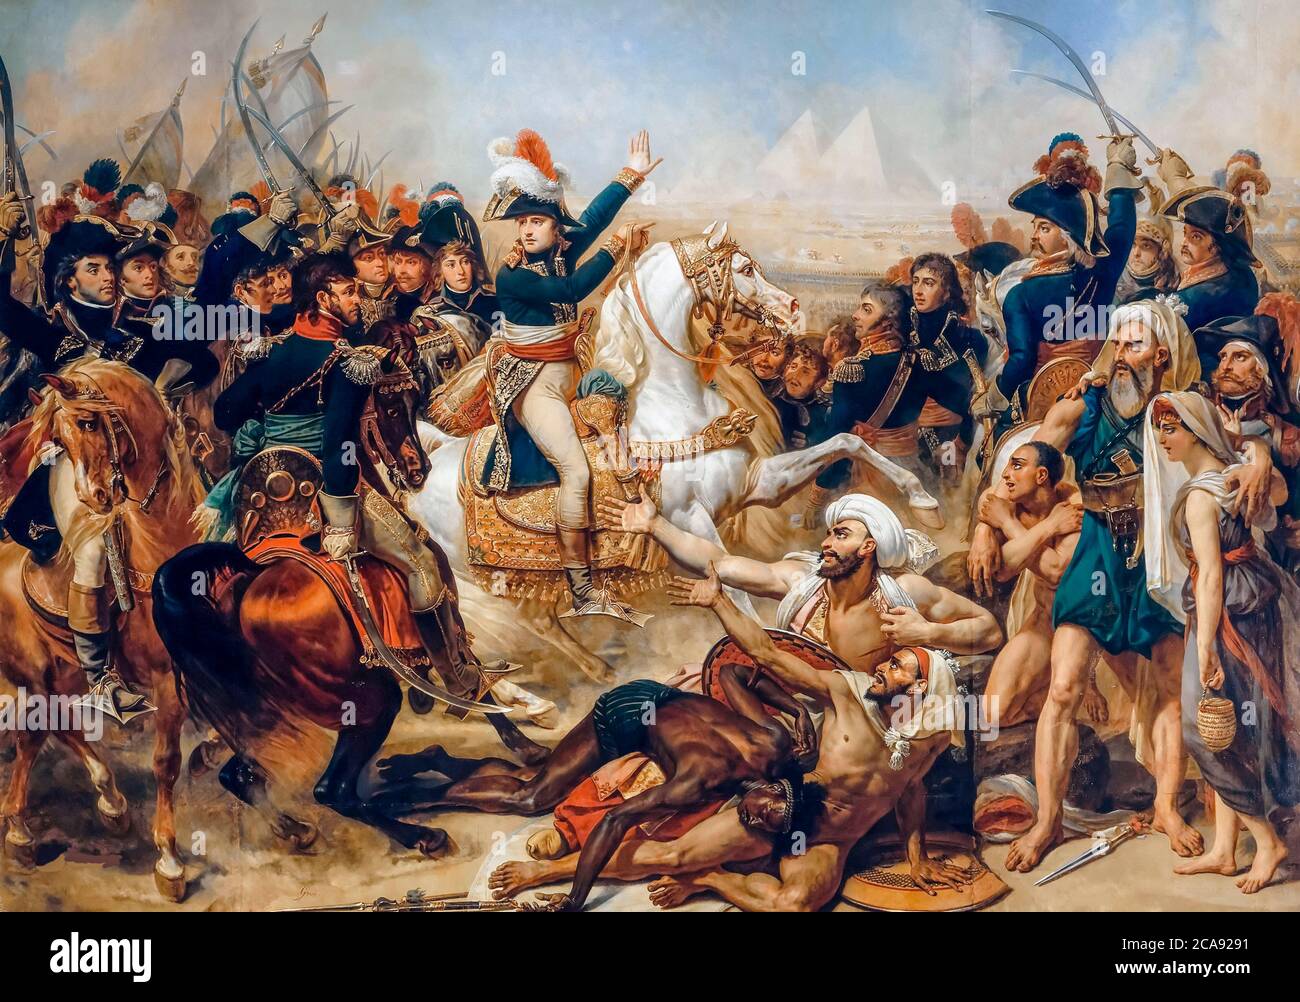 Battle of the Pyramids, July 21st 1798 (Napoleon Bonaparte, Battle of Embabeh), painting by Antoine-Jean Gros, 1810 Stock Photo - Alamy